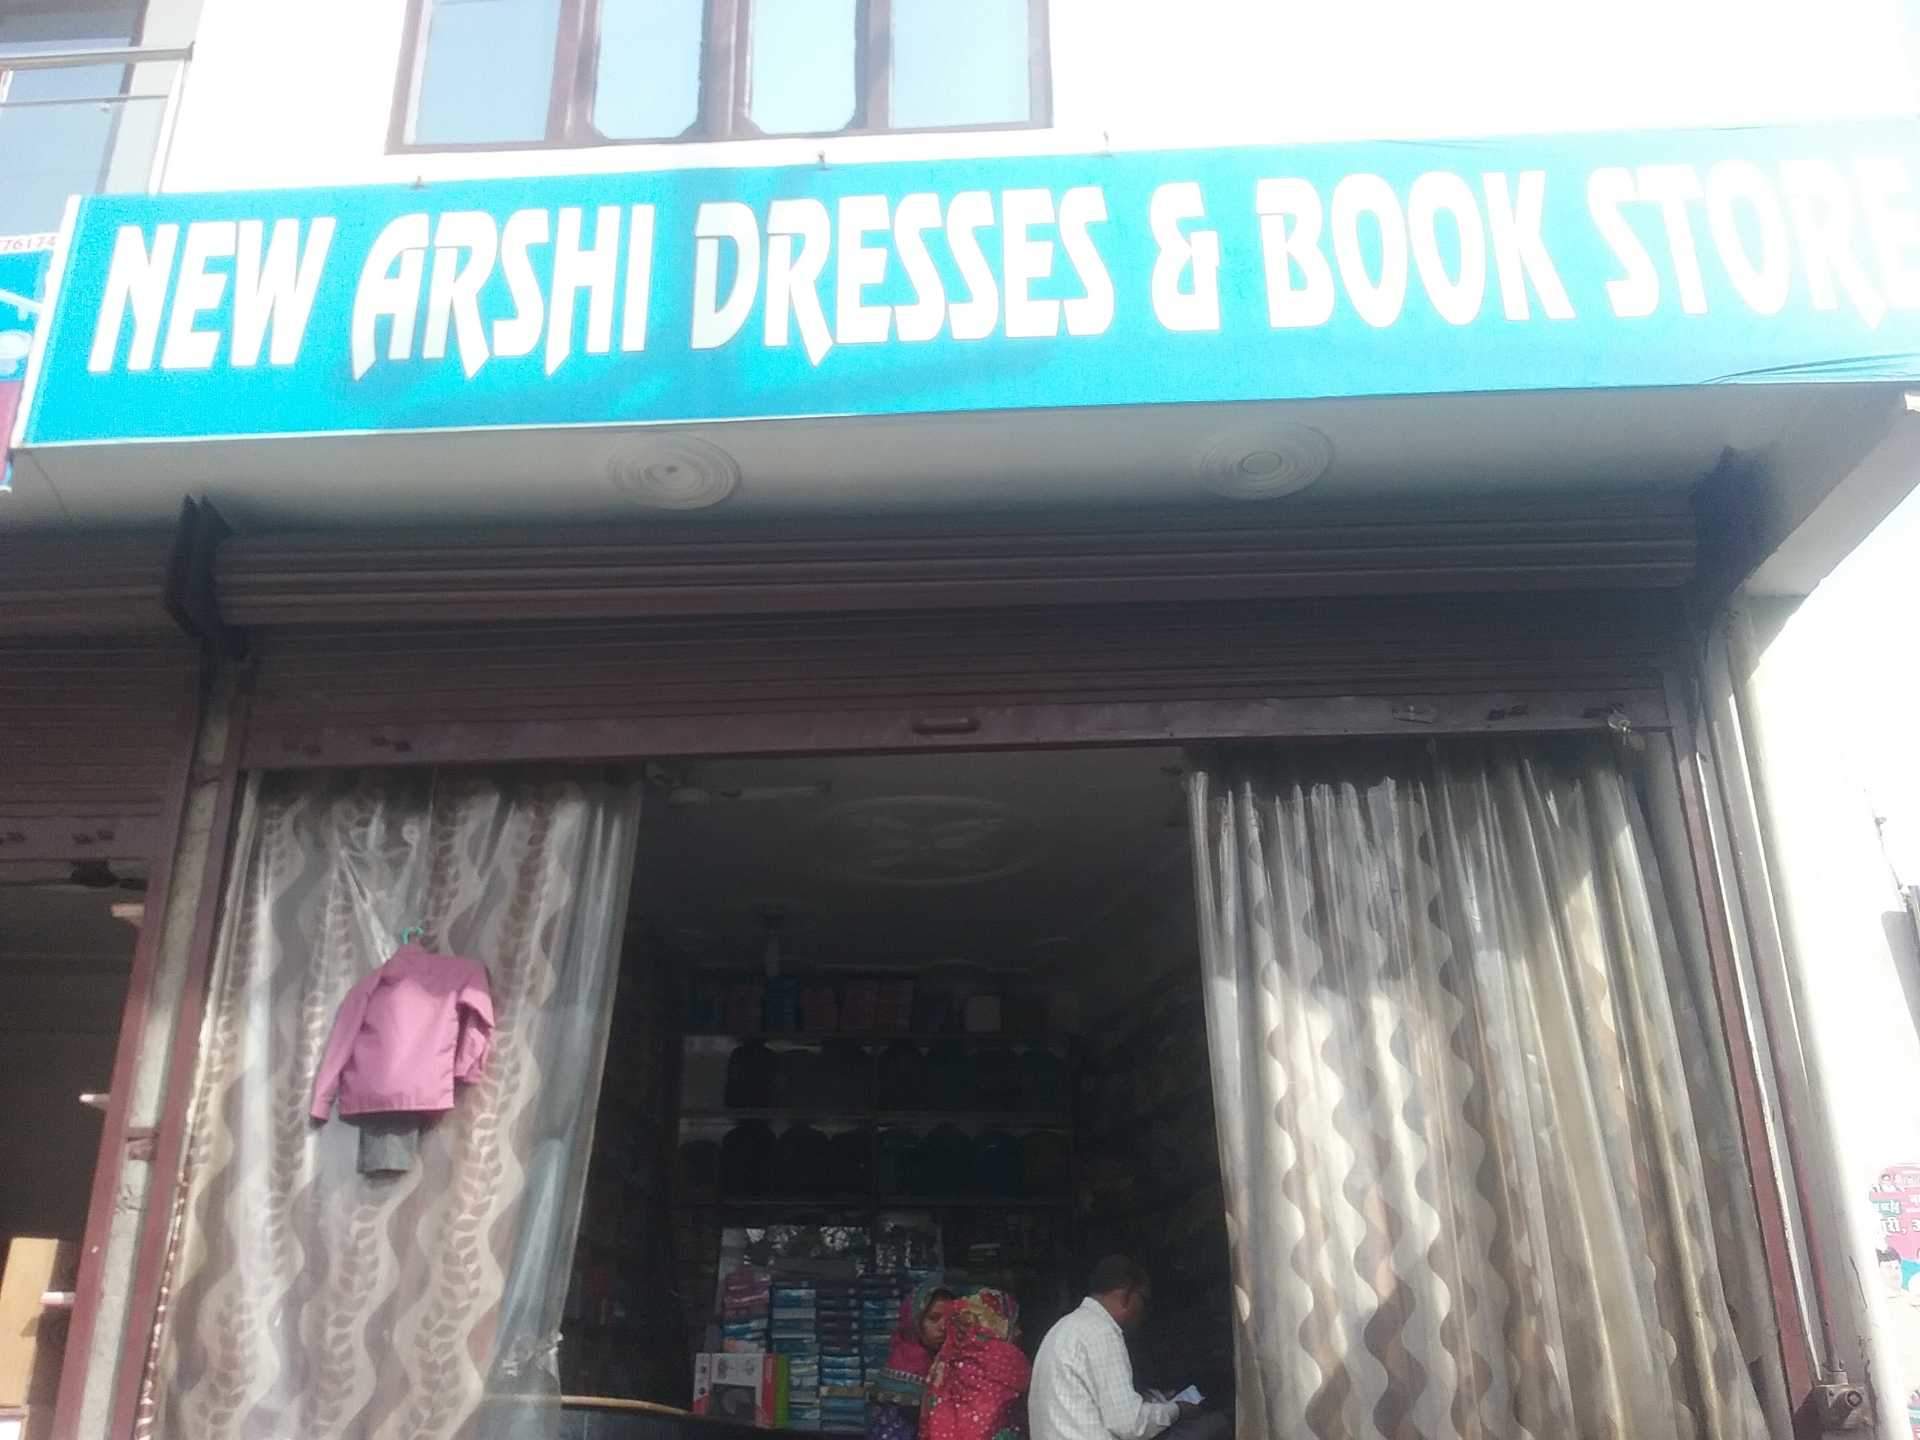 New Arshi Dresses And Book Store Photos, , Etah - Commercial Building , HD Wallpaper & Backgrounds